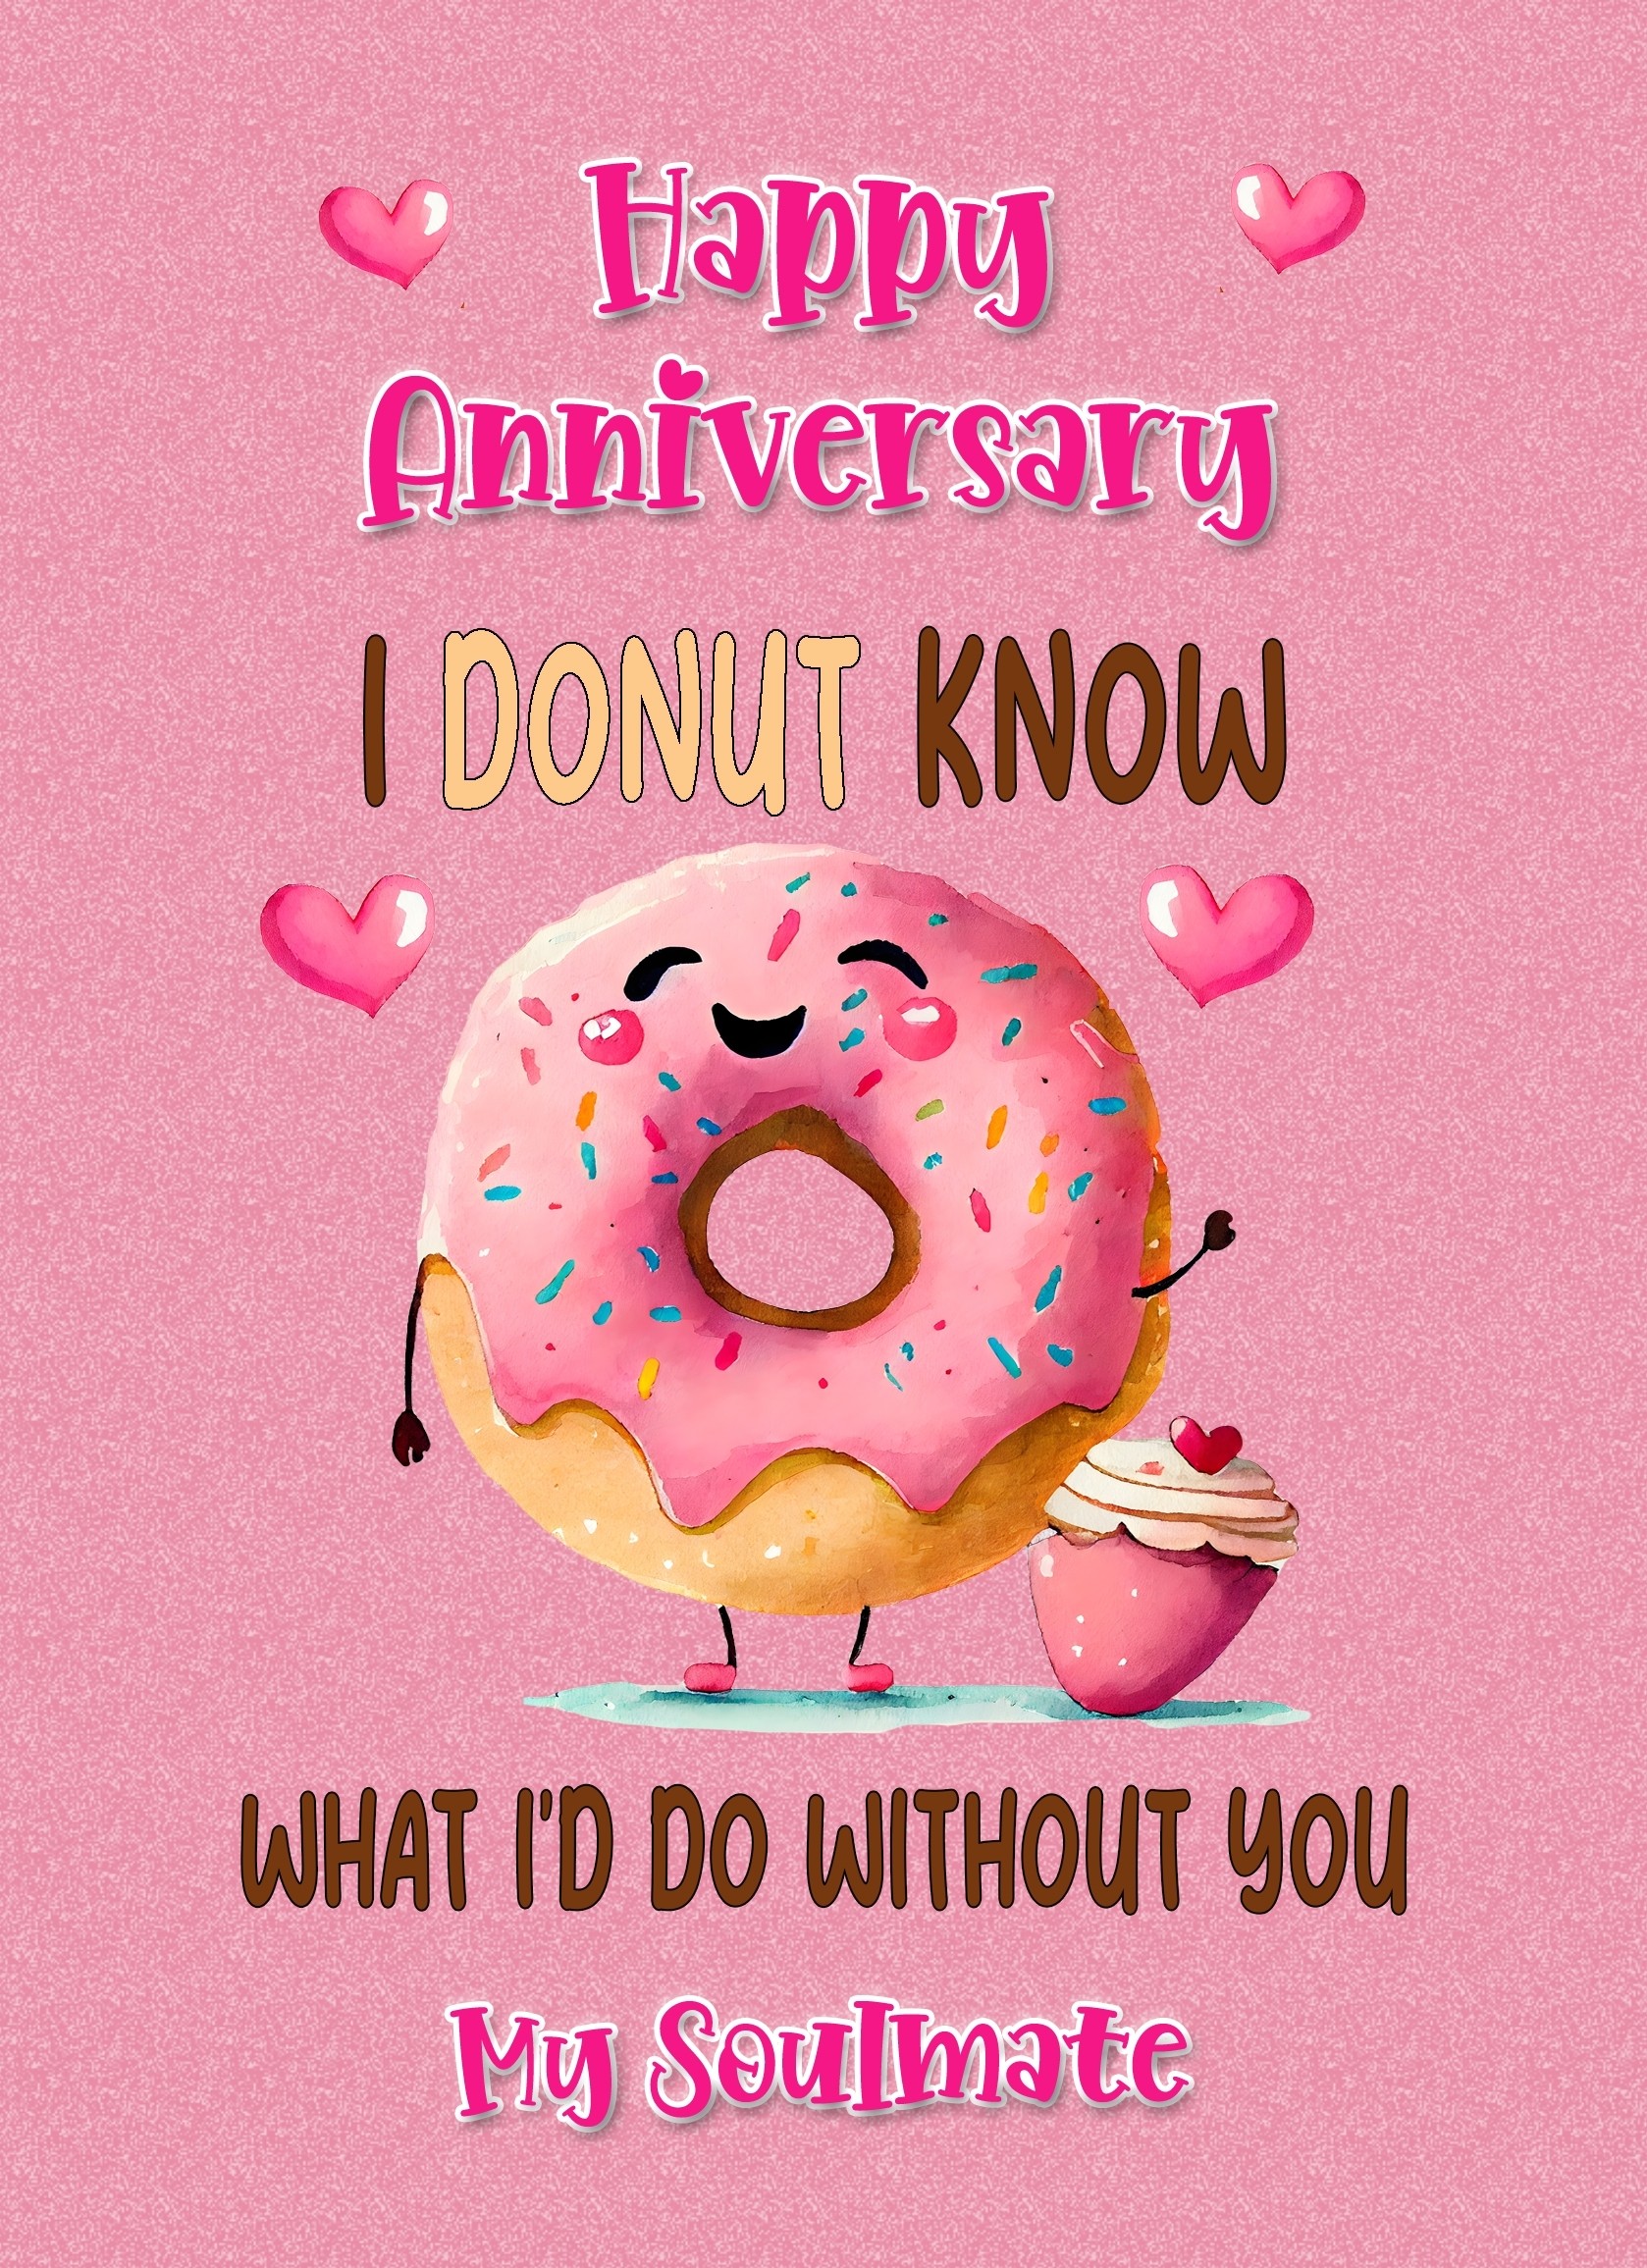 Funny Pun Romantic Anniversary Card for Soulmate (Donut Know)